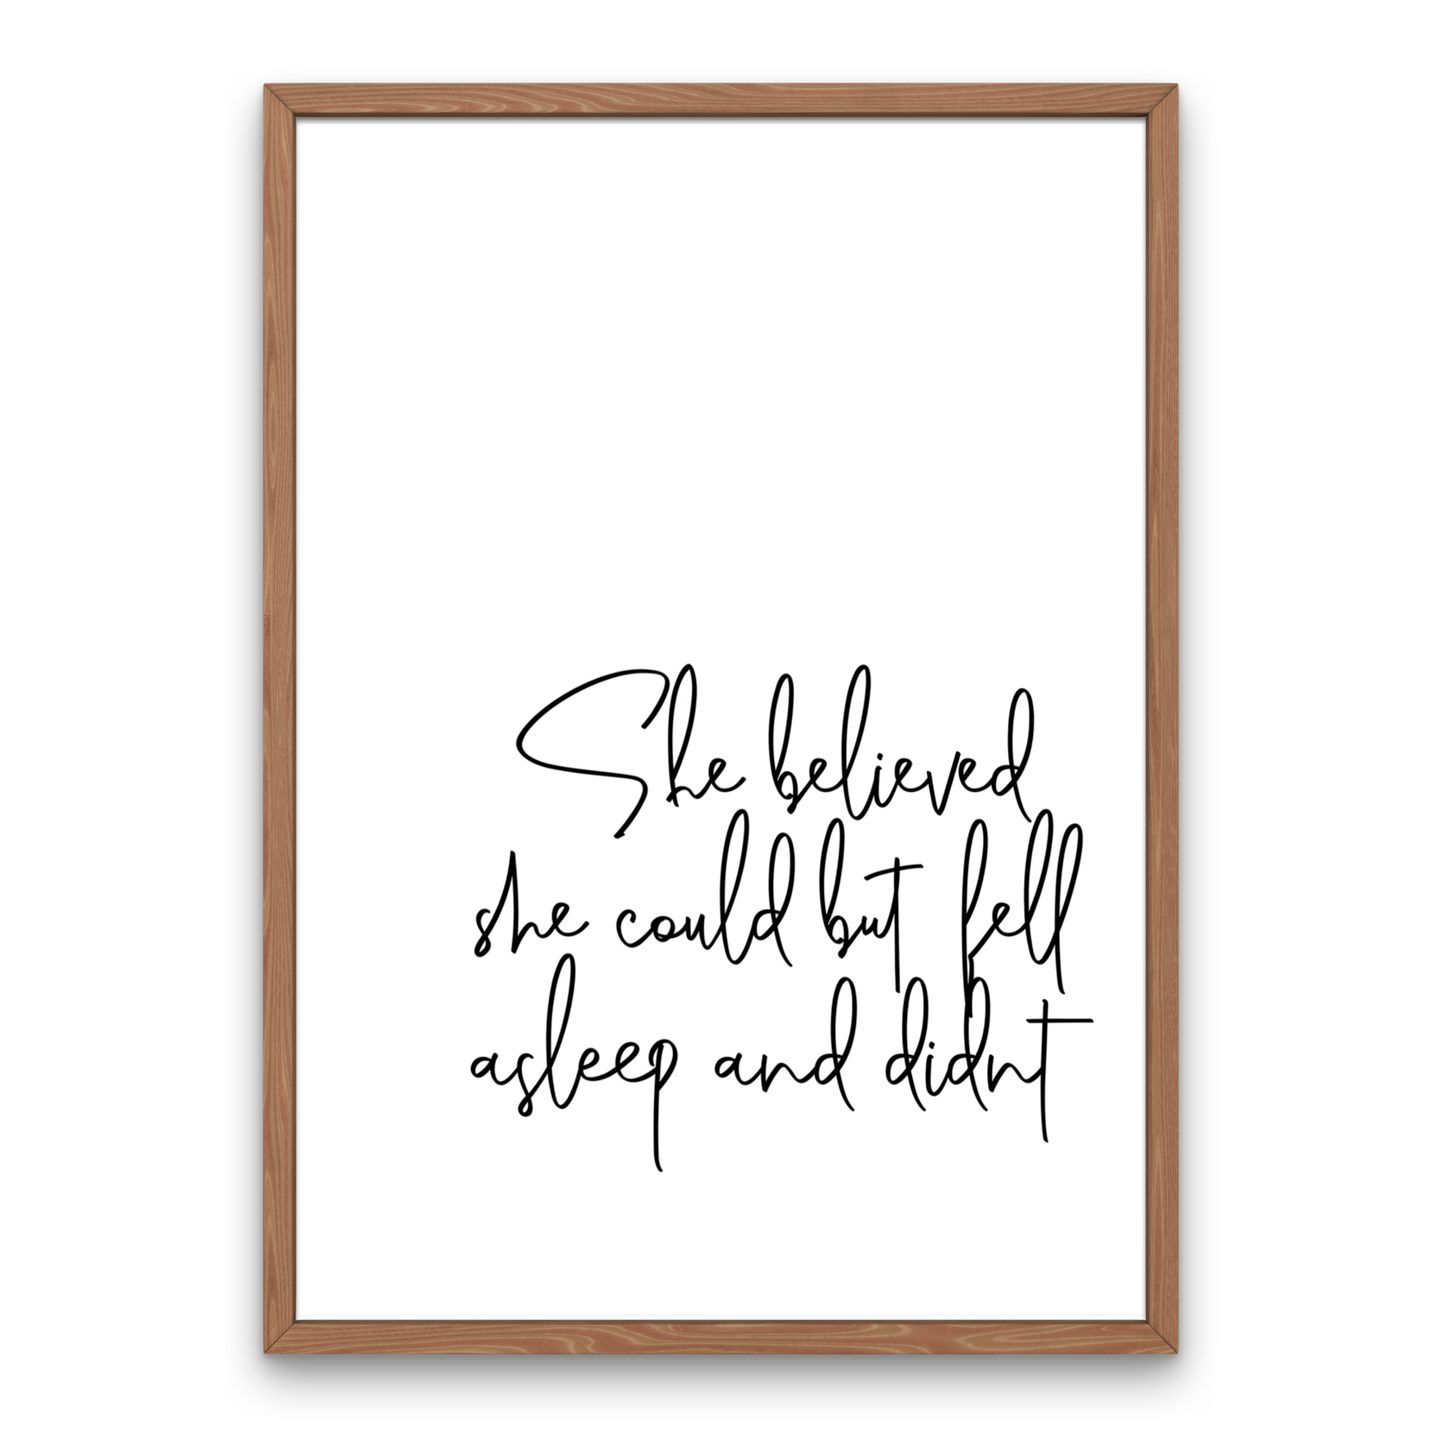 She Believed She Could but Fell Asleep and Didn't - Funny Minimal Art Print